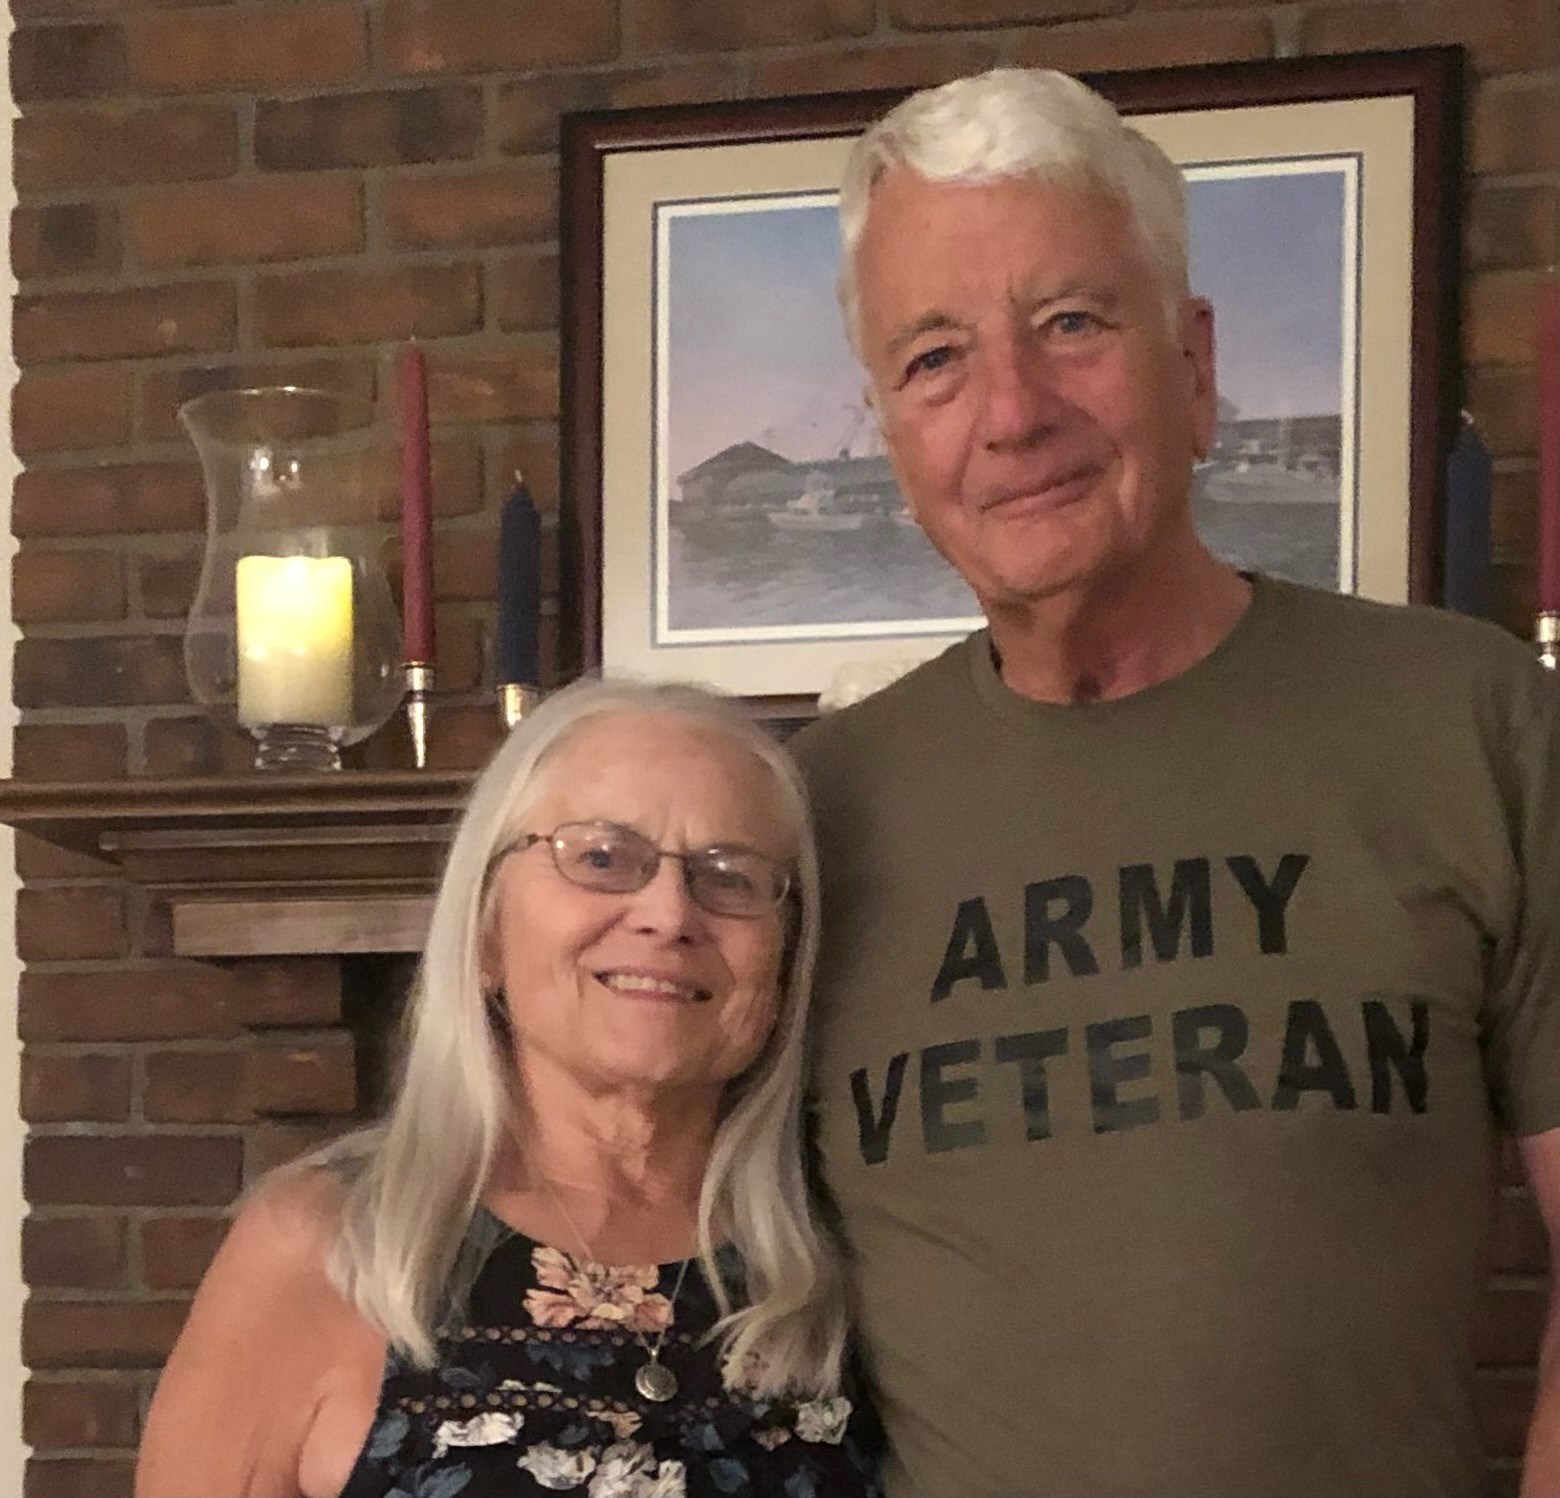 Doreen and Norman Greczyn, Kansas residents, were grateful for the speedy care Doreen received from WellSpan Ephrata Community Hospital when she had a heart attack on their 50th anniversary, as they were traveling through Lancaster County.